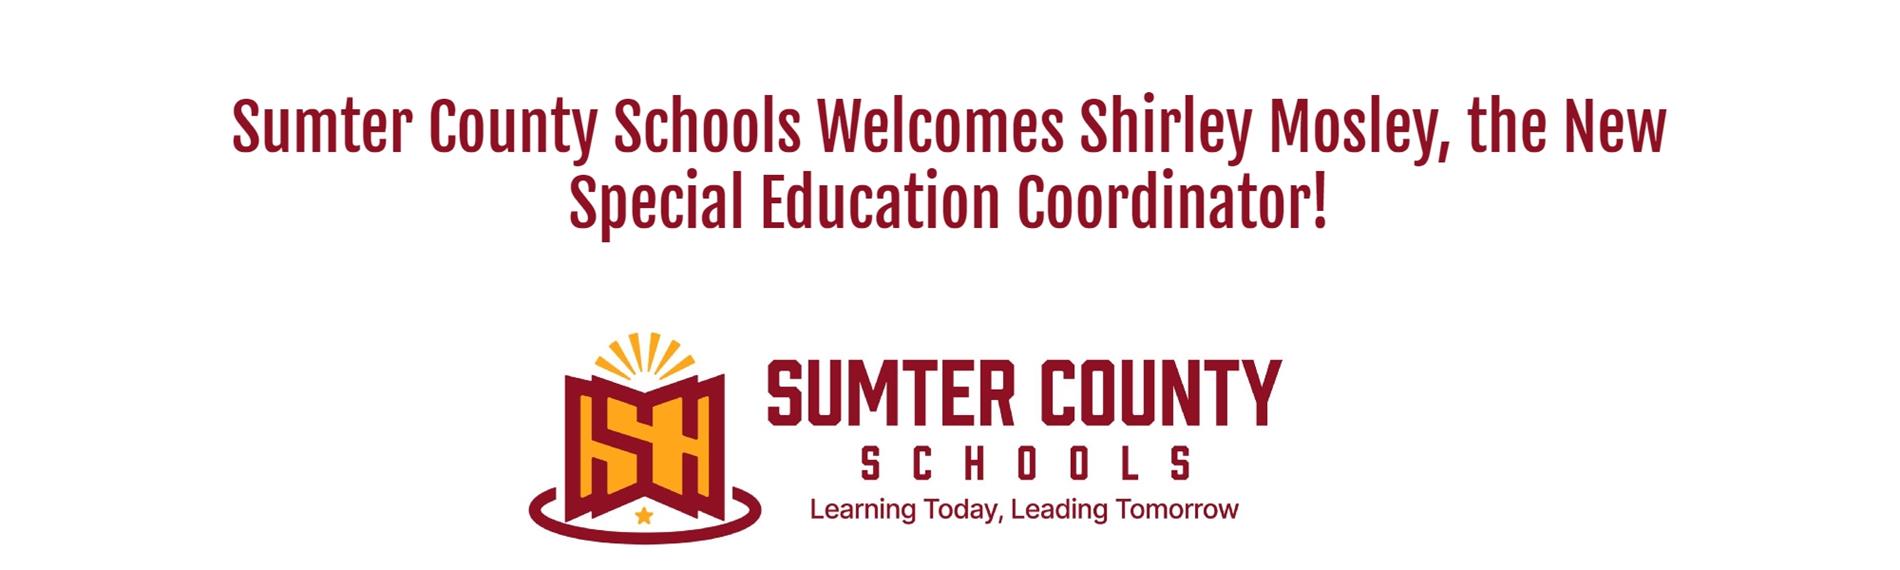 Sumter County Schools Welcomes Shirley Mosley, the New Special Education Coordinator